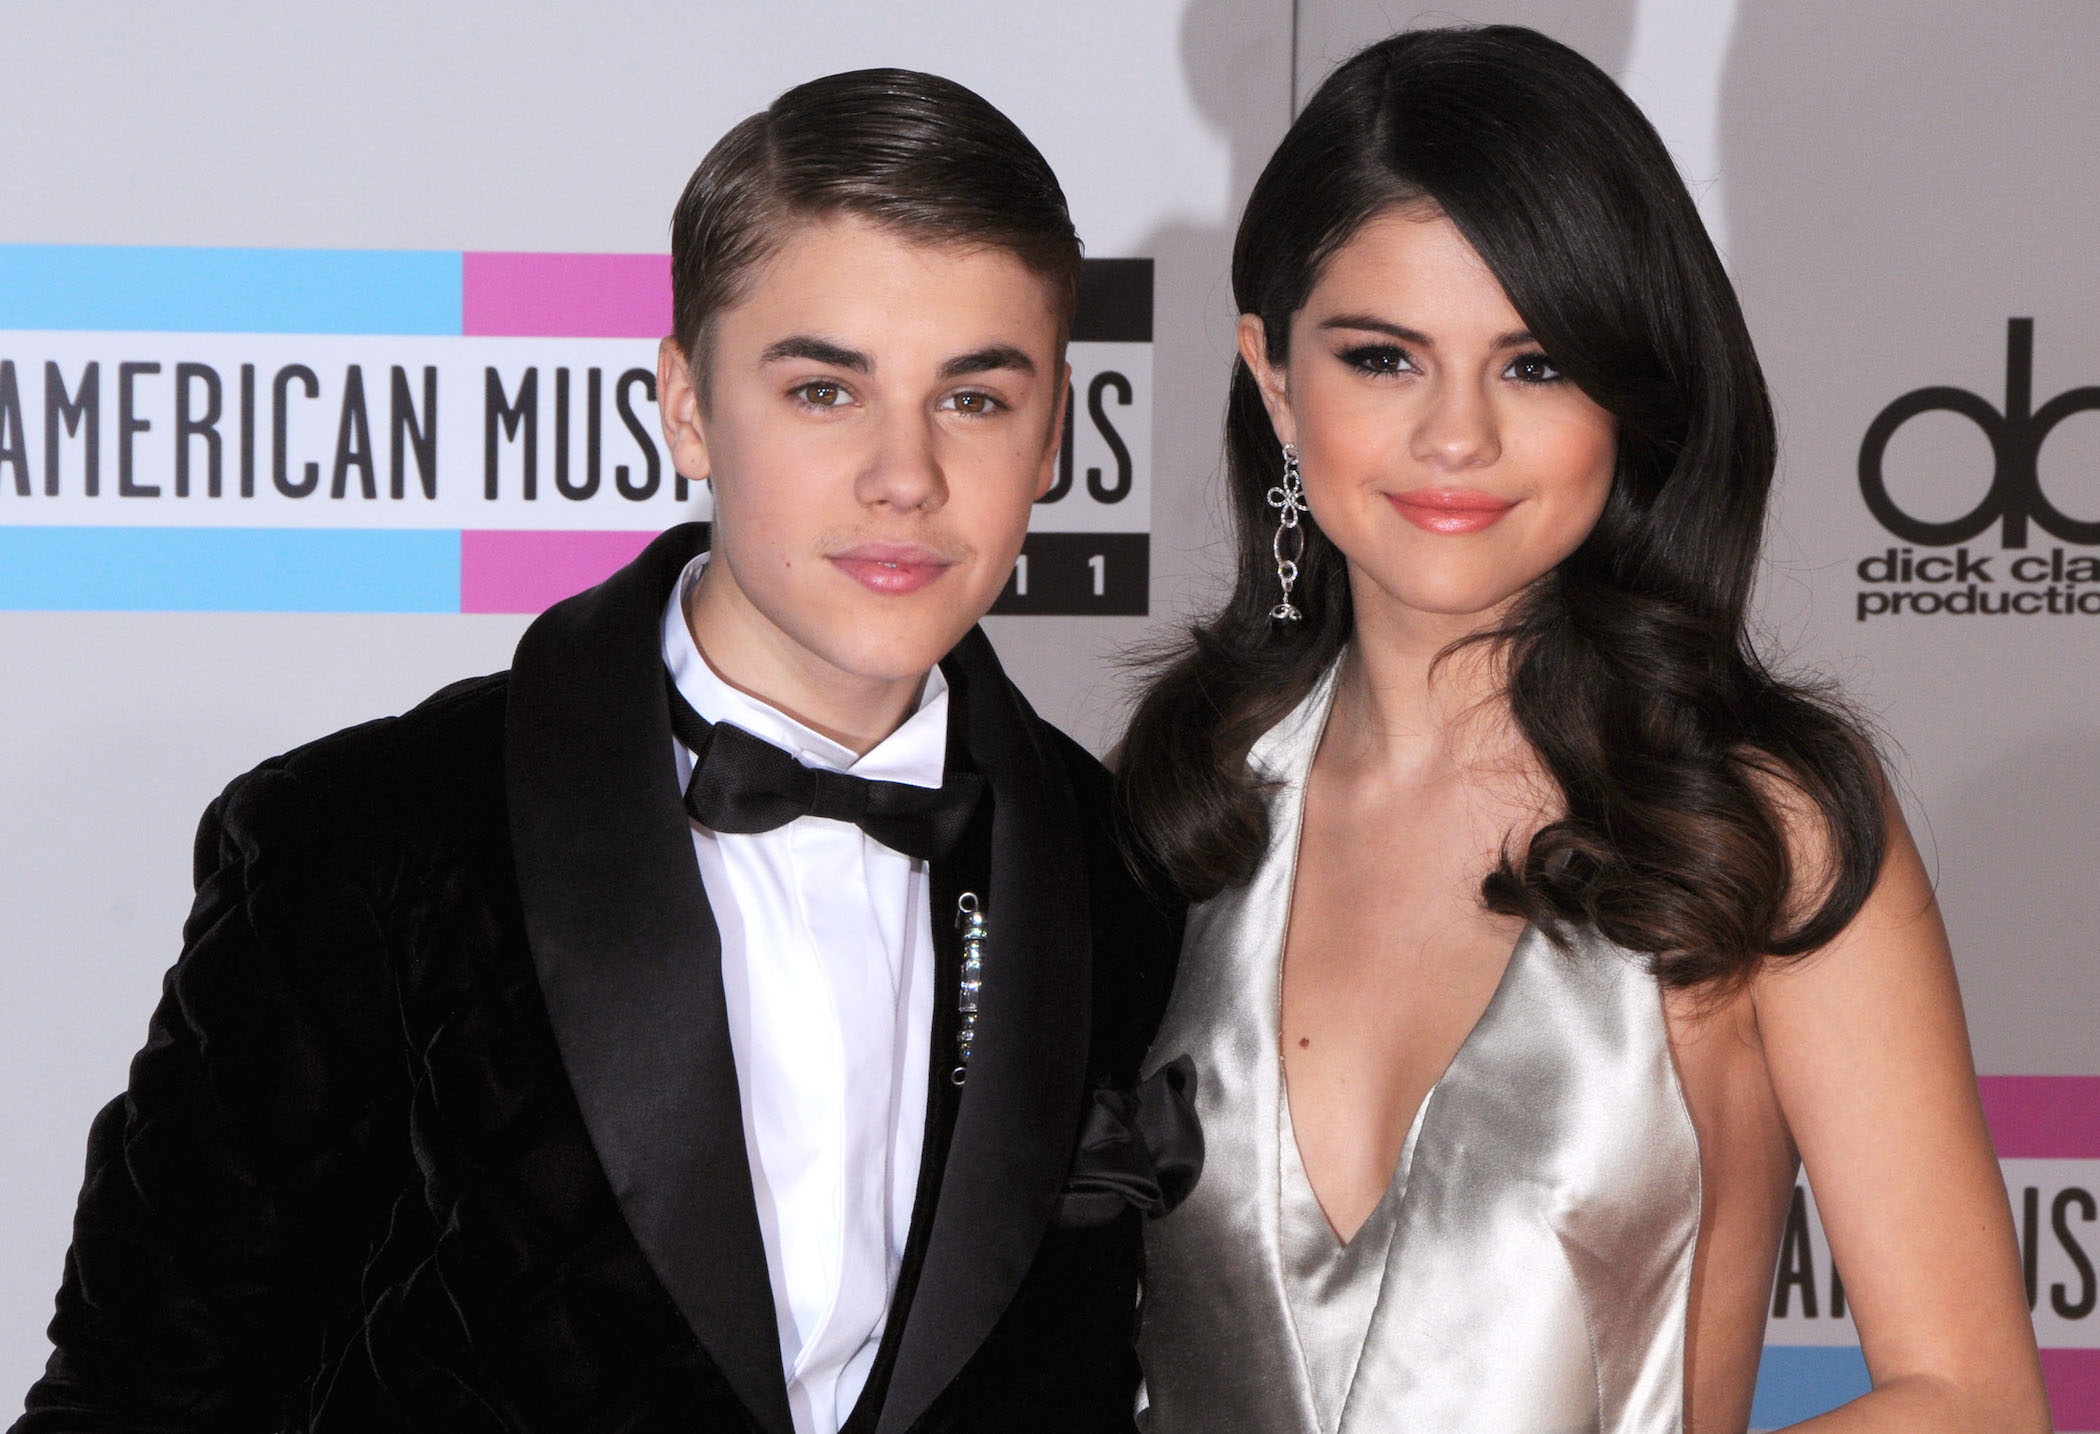 Justin Bieber and Selena Gomez arrive at the 2011 American Music Awards